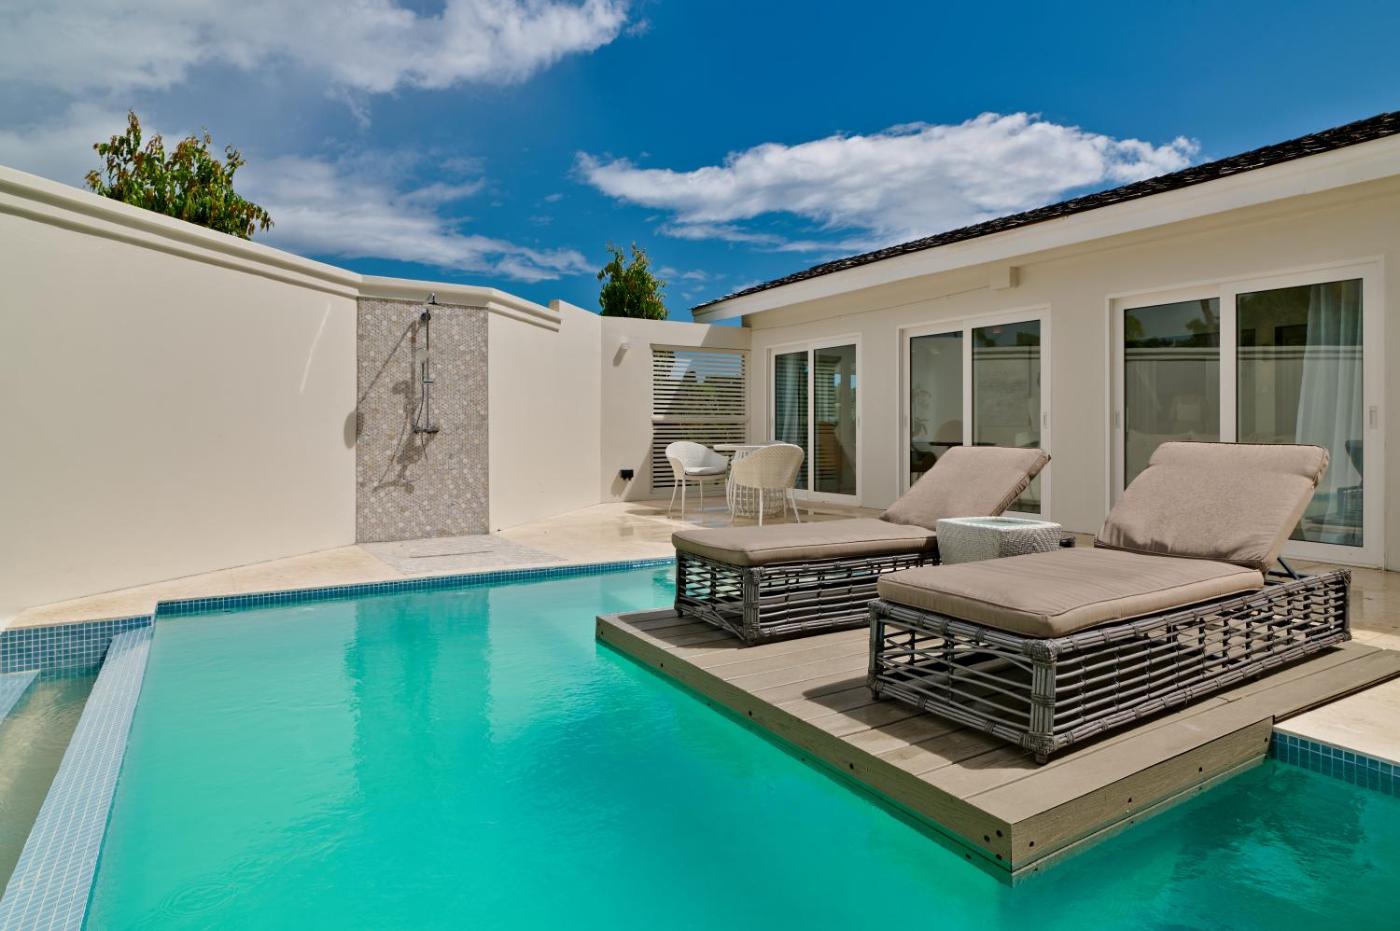 Hotel with private pool - Calabash Luxury Boutique Hotel